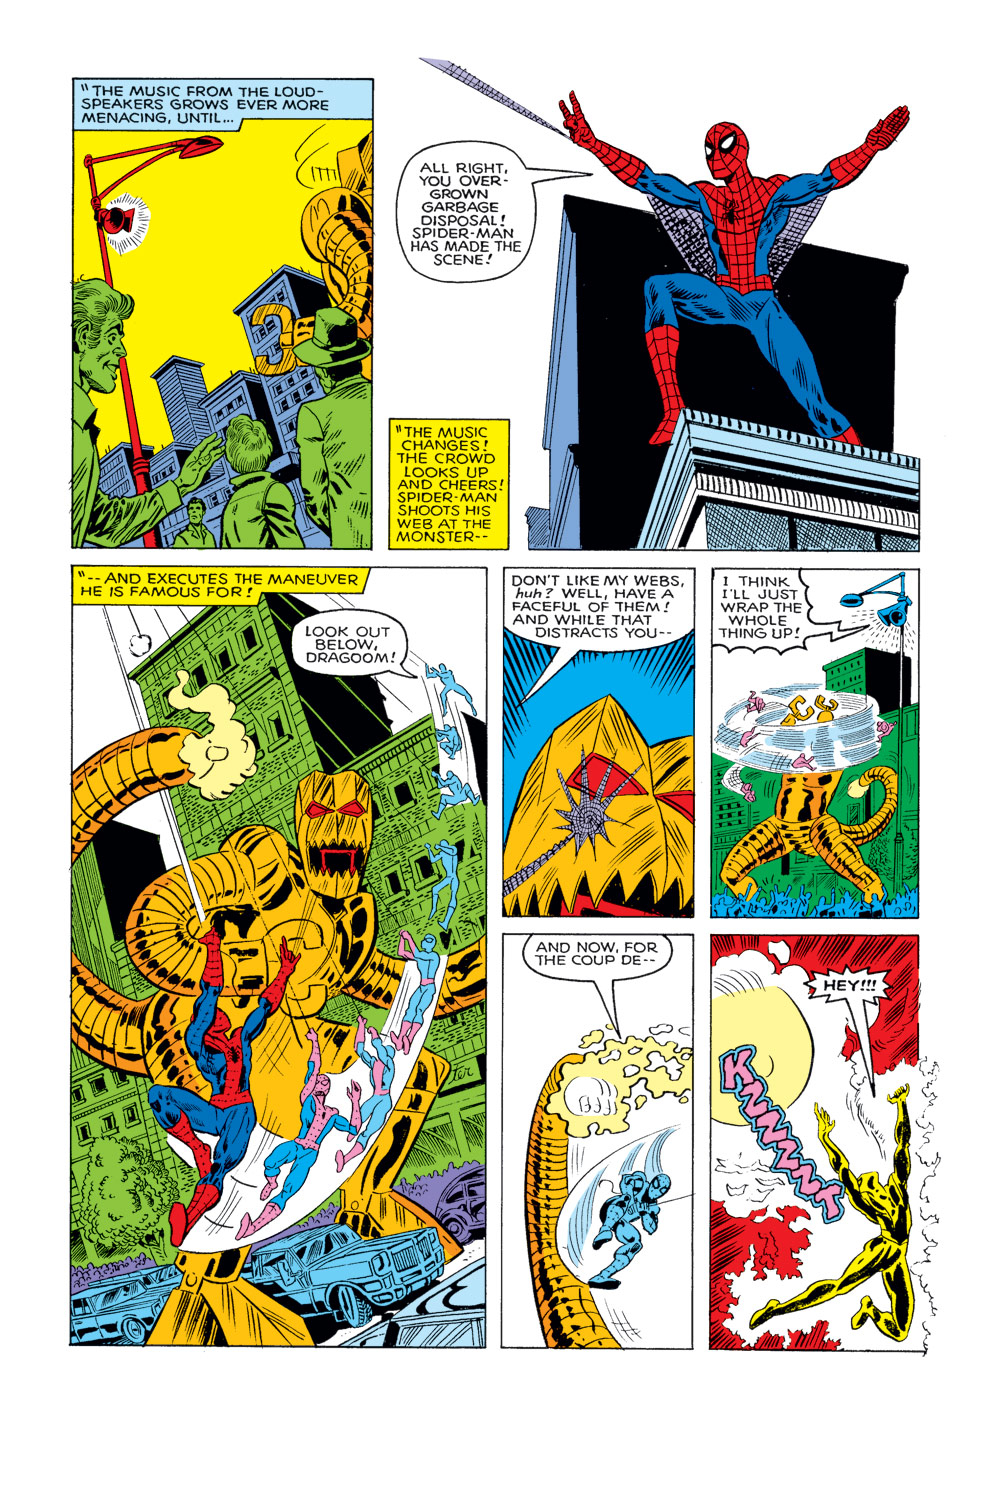 What If? (1977) issue 19 - Spider-Man had never become a crimefighter - Page 25